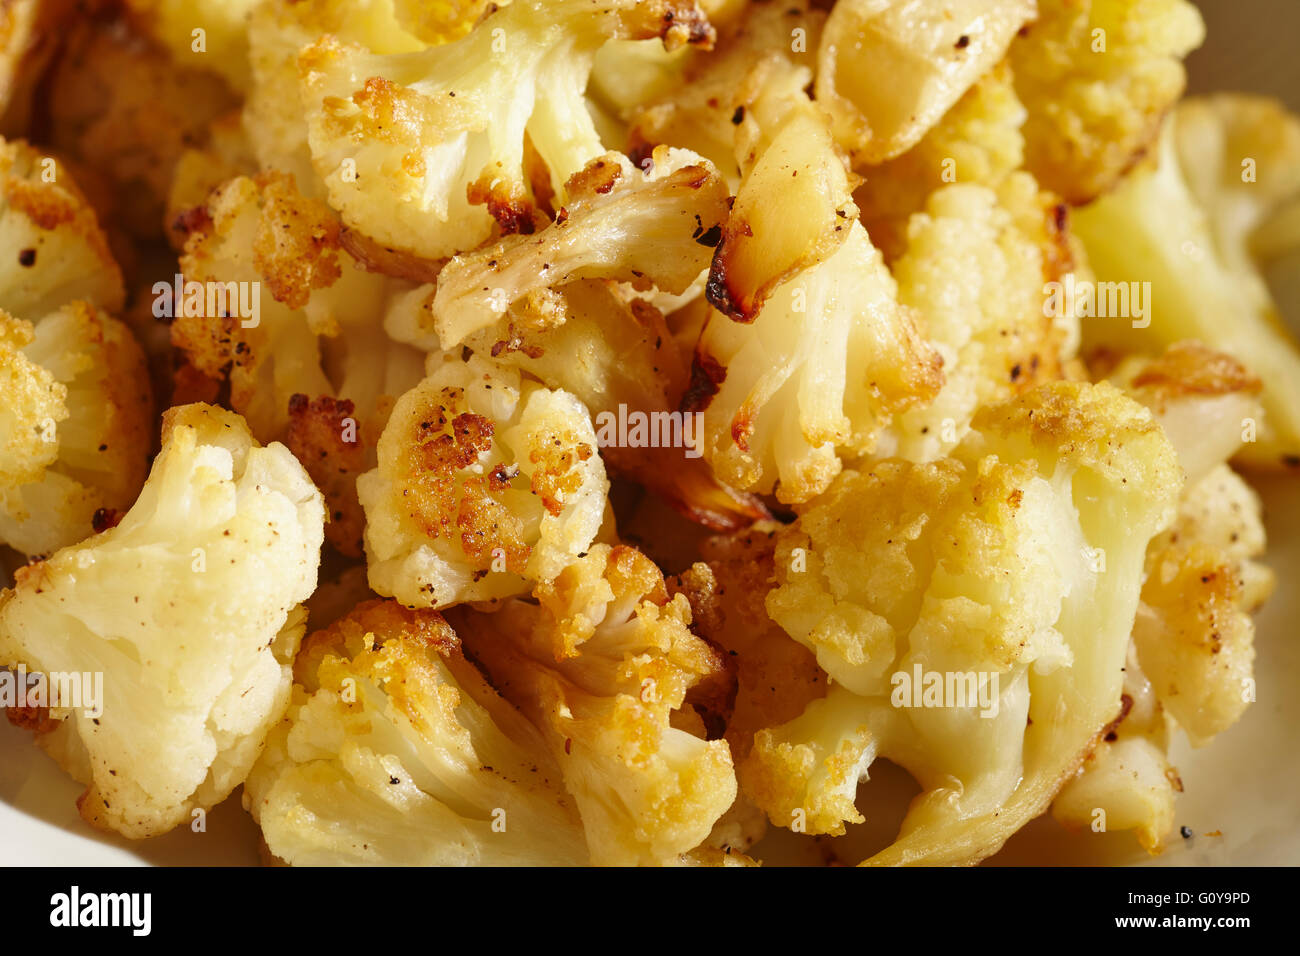 A serving of oven roasted cauliflower Stock Photo